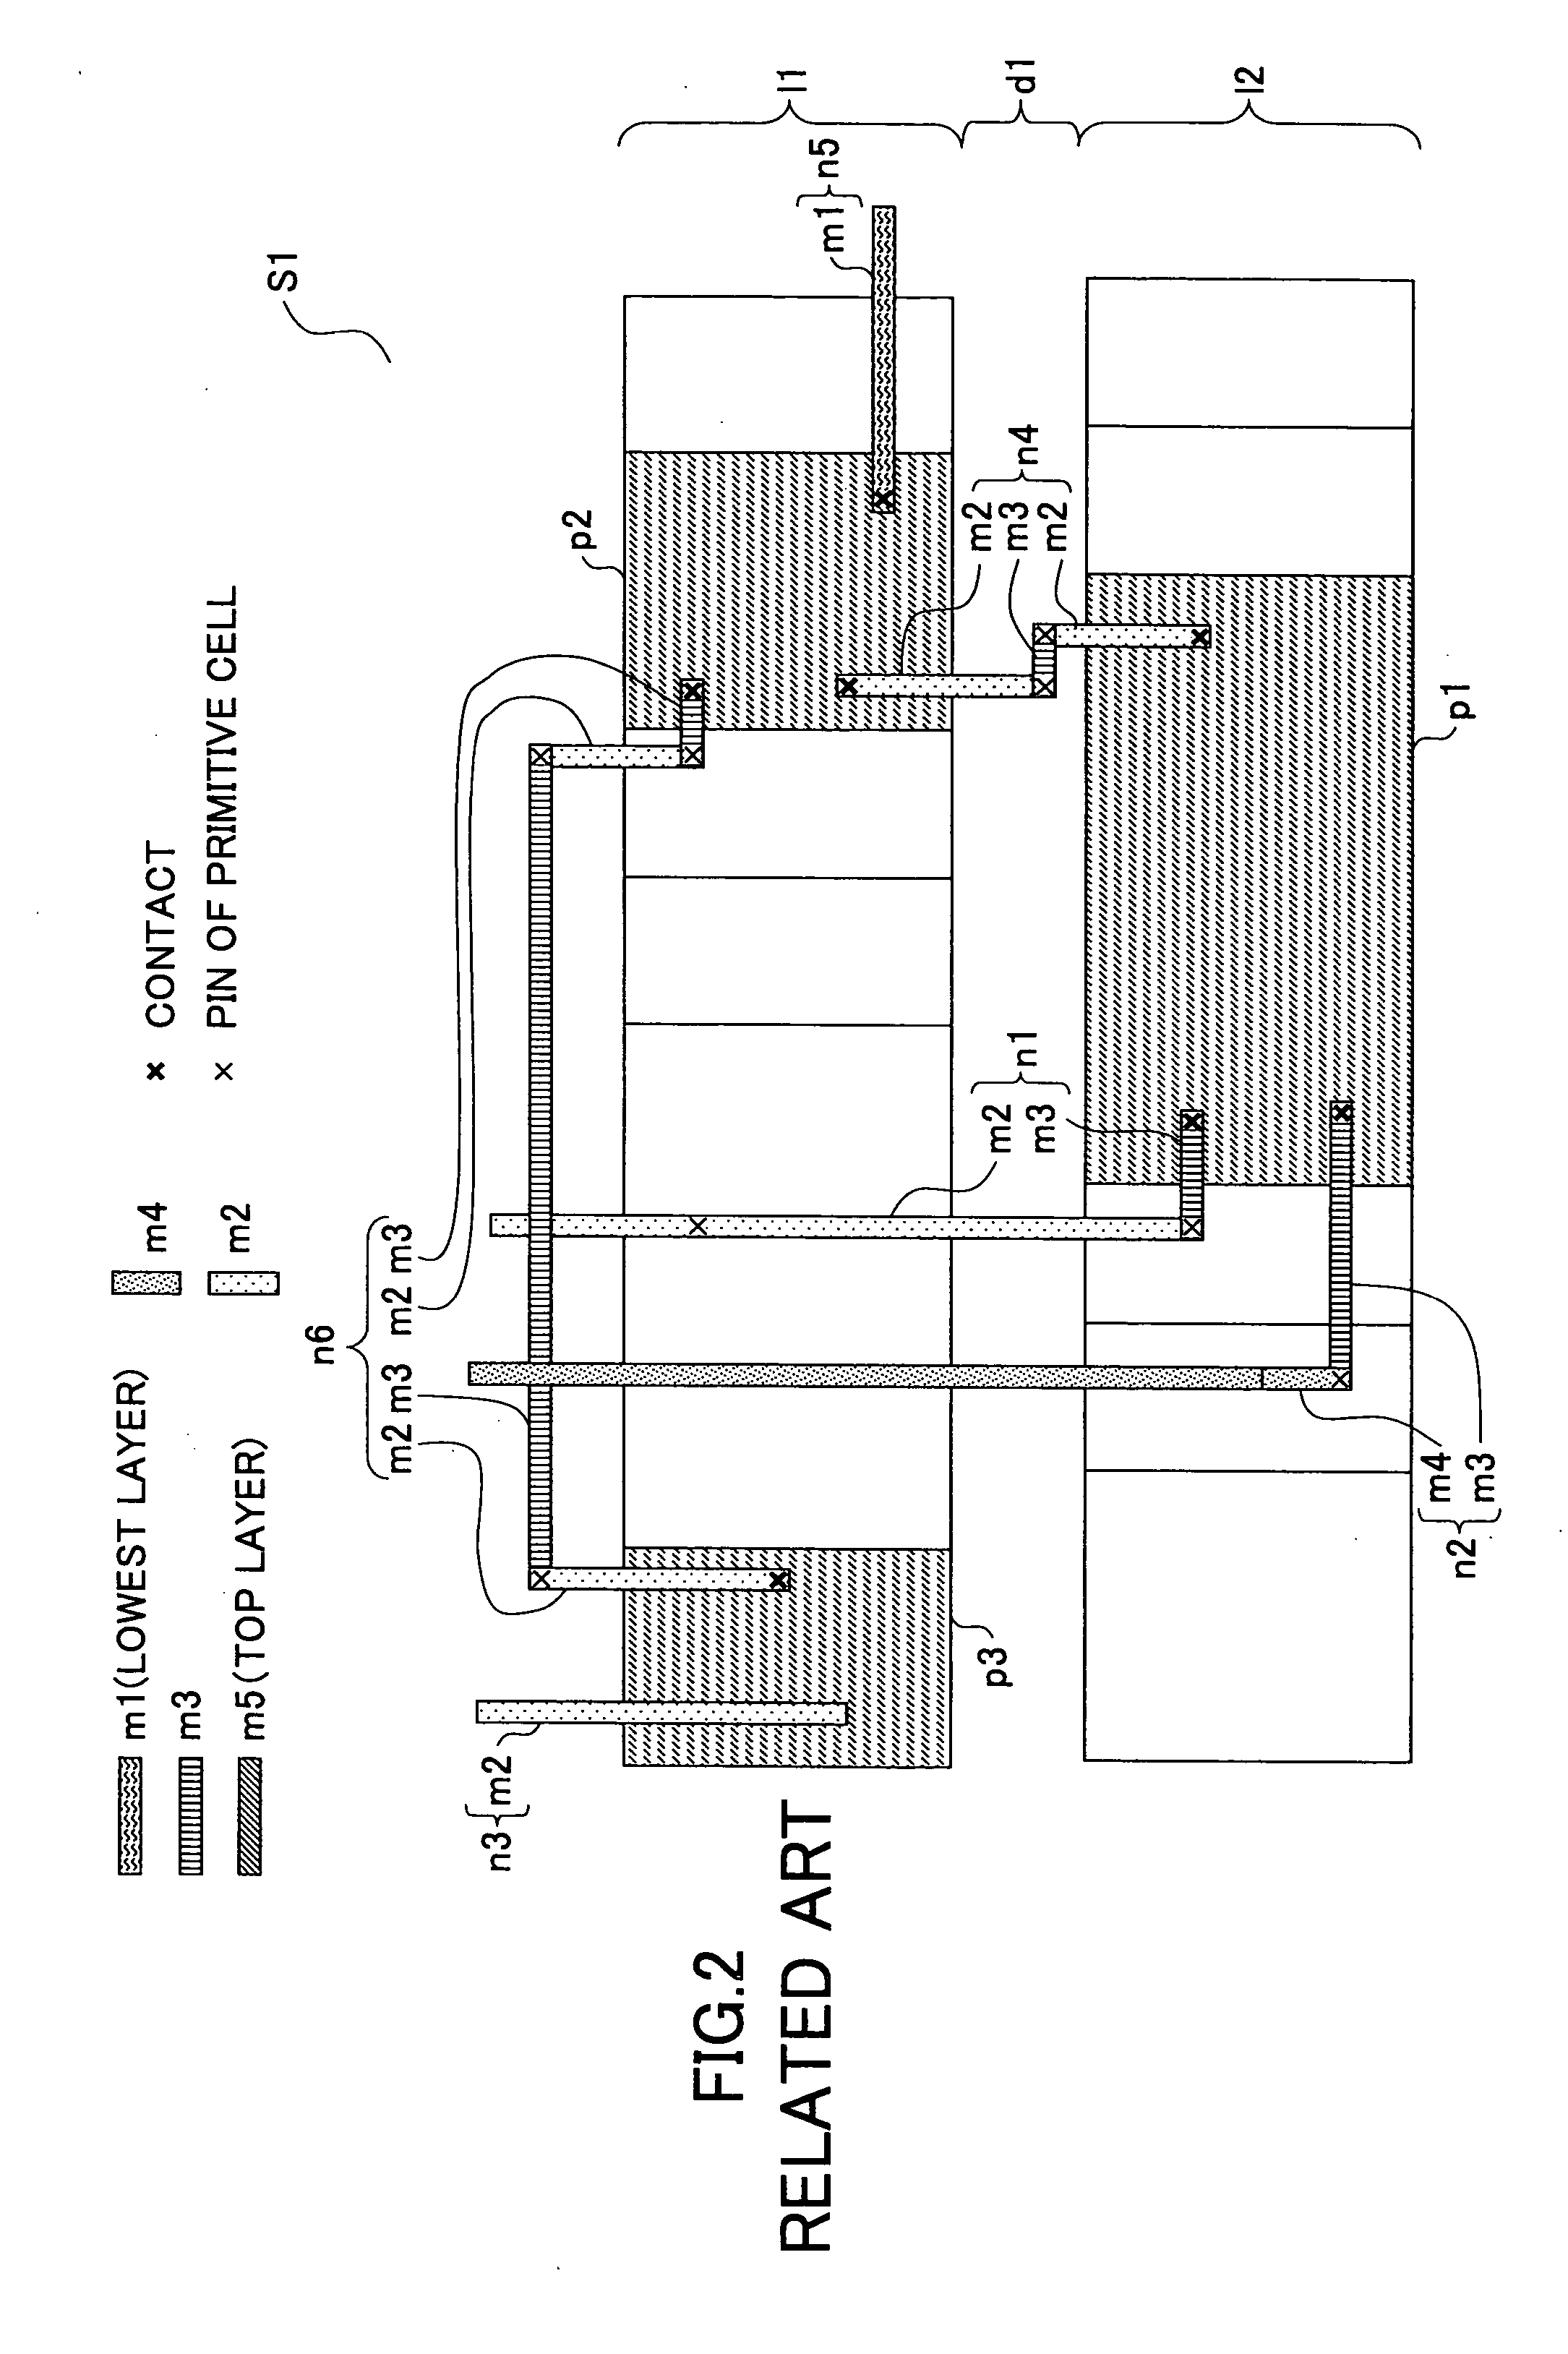 Semiconductor device, manufacturing method of the semiconductor device, and design method of the semiconductor device